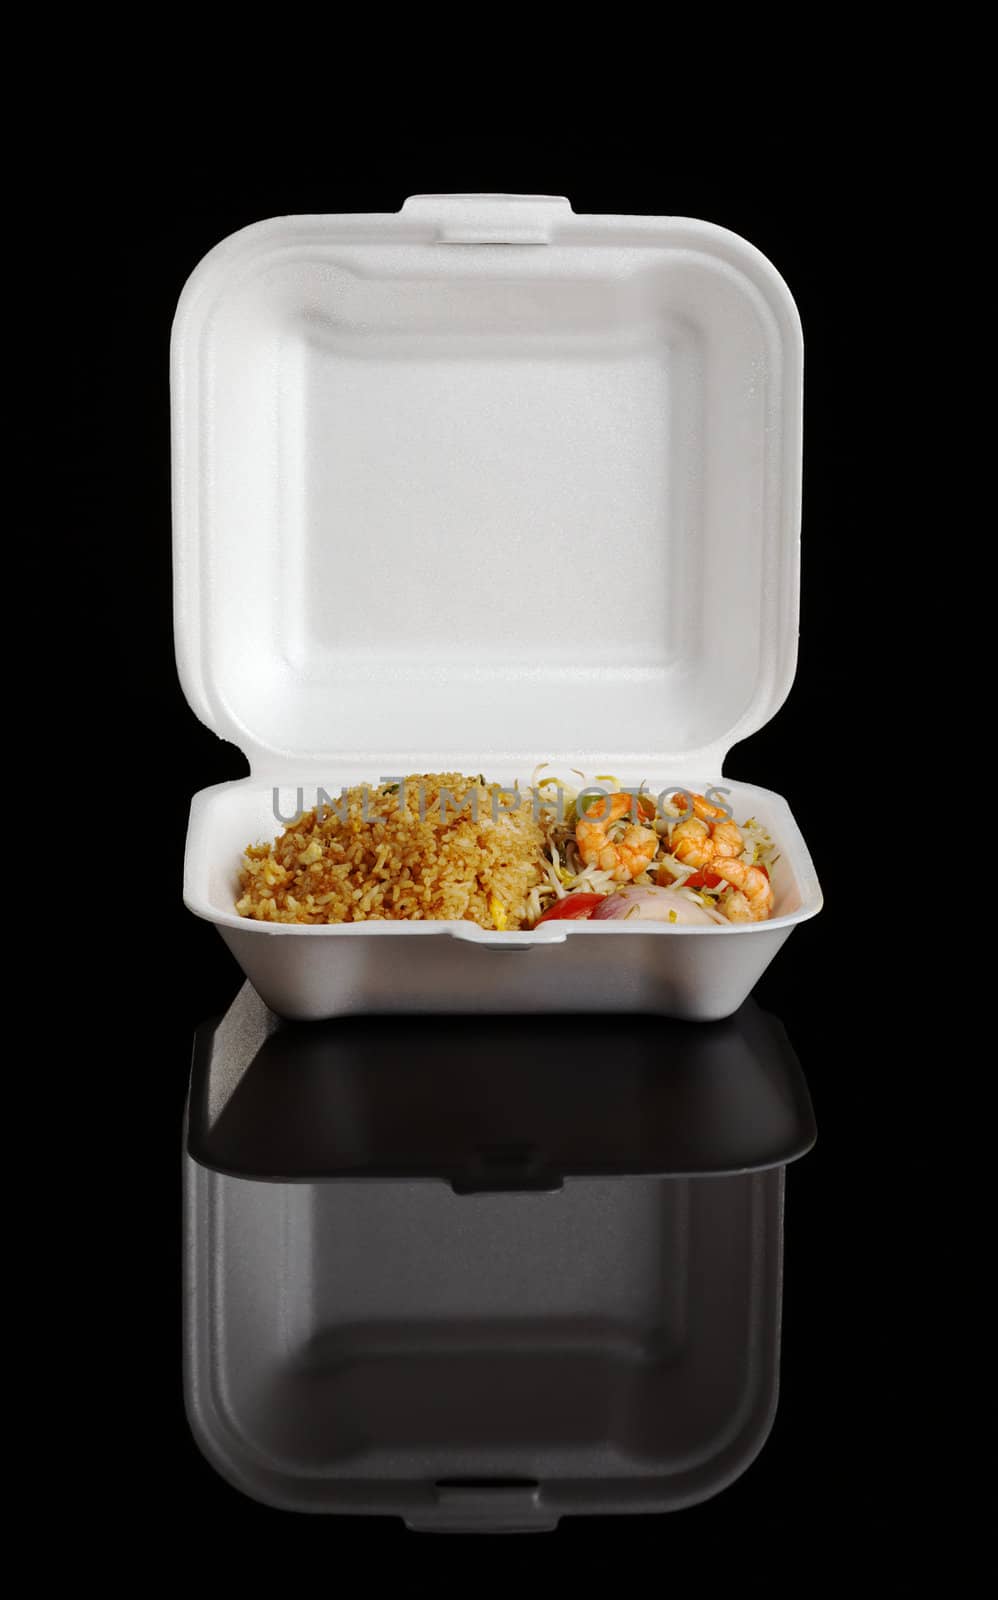 Chinese take-away food: Fried rice with king prawns and vegetables in a styrofoam box photographed on black 